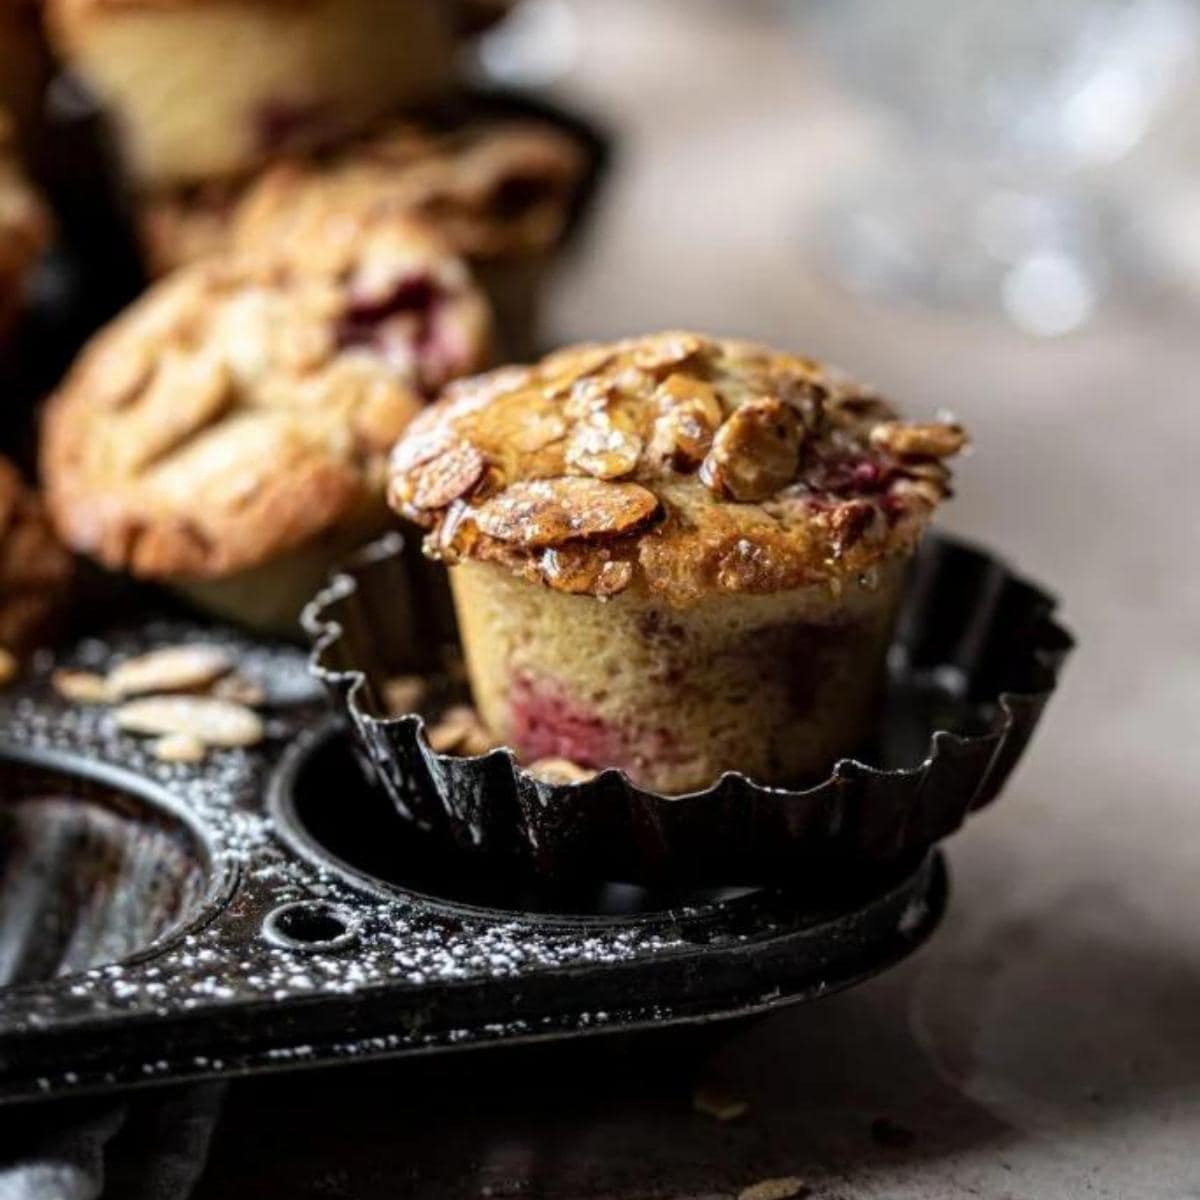 Raspberry almond muffin on a vintage muffin tray.